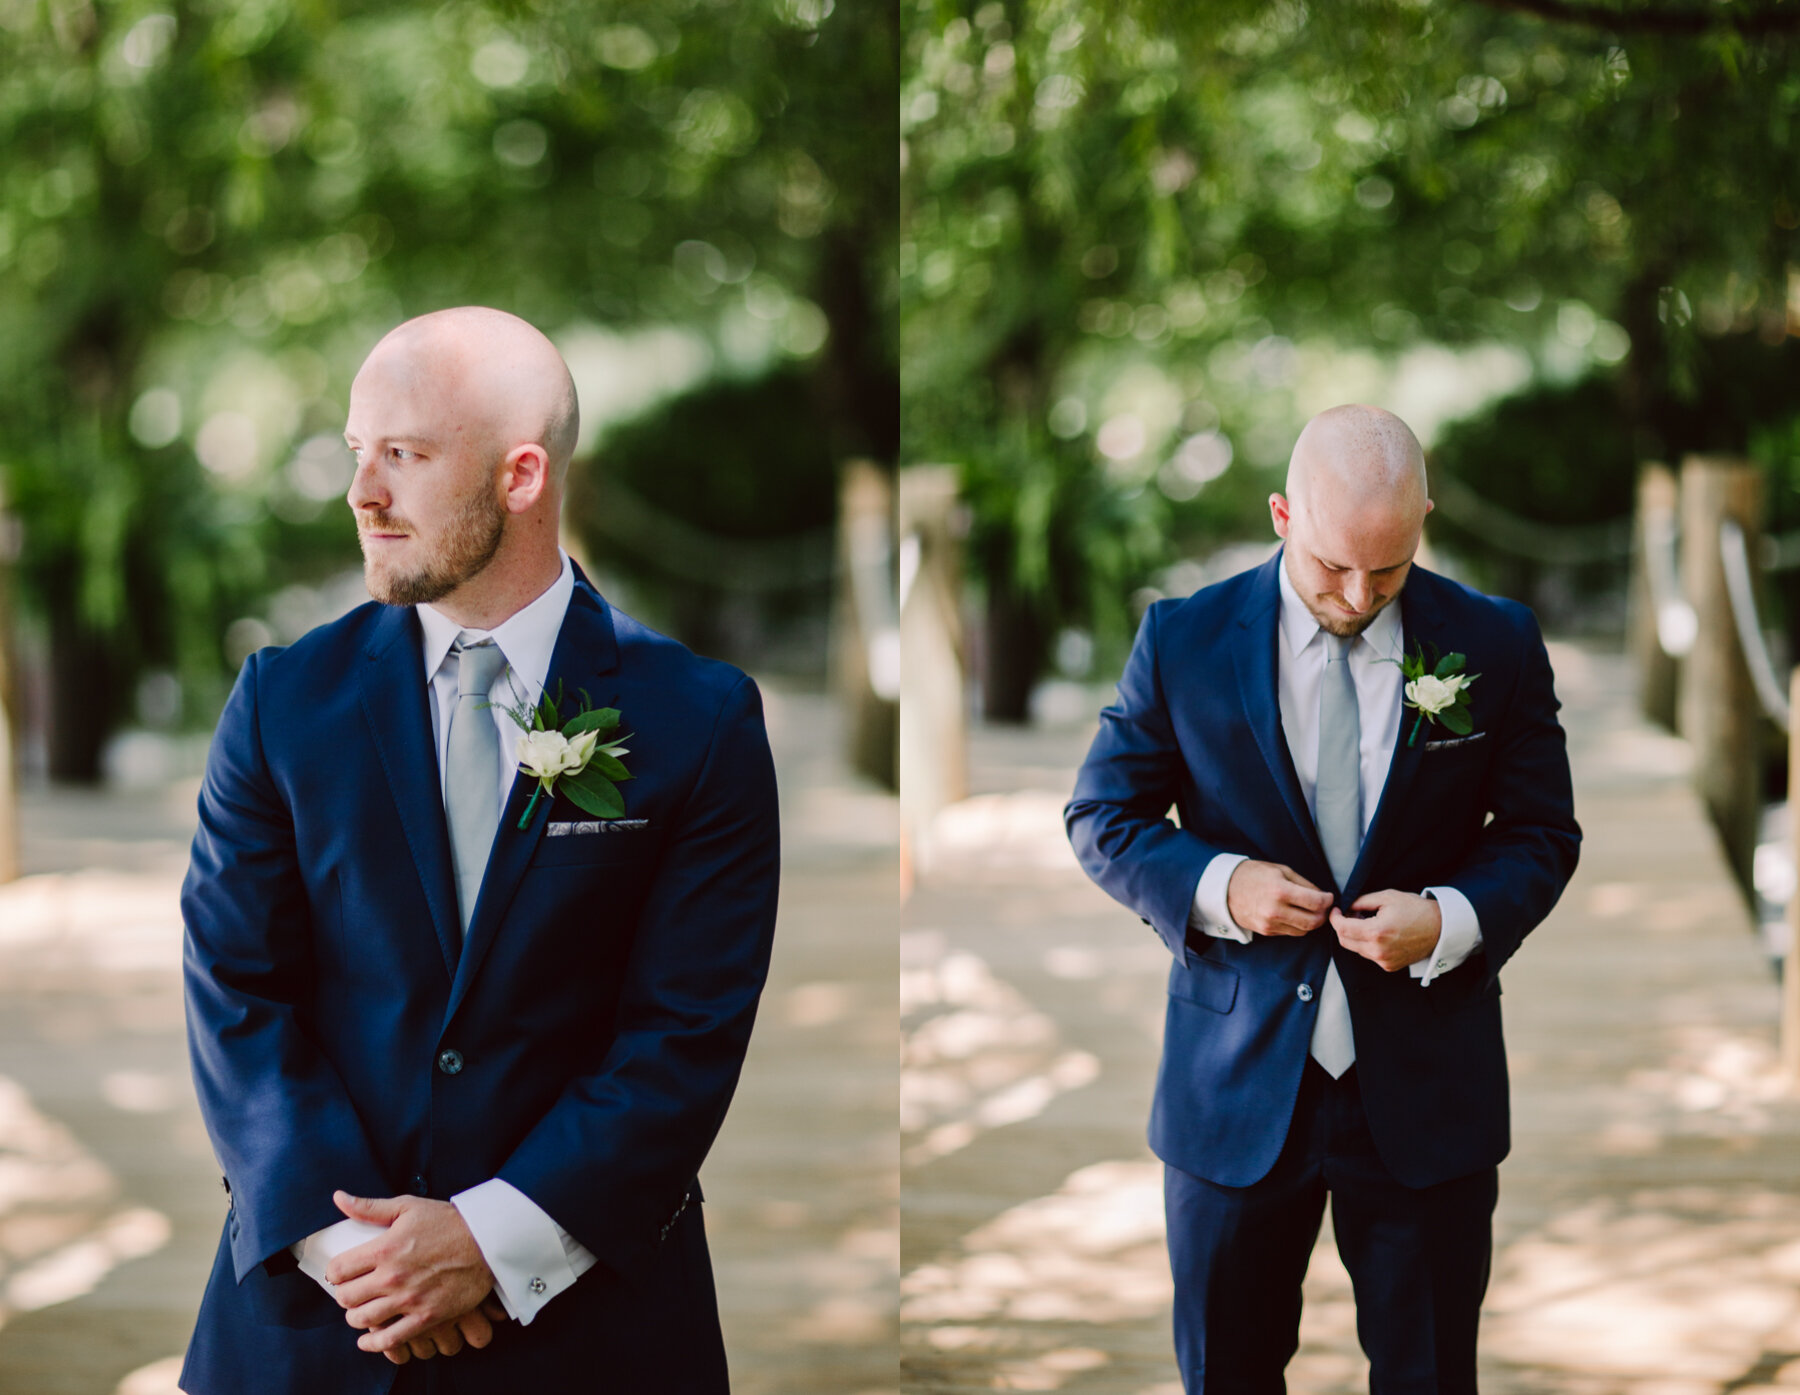 groom buttoning his suit before a sunny outdoor wedding at hunter valley farms in knoxville tennessee